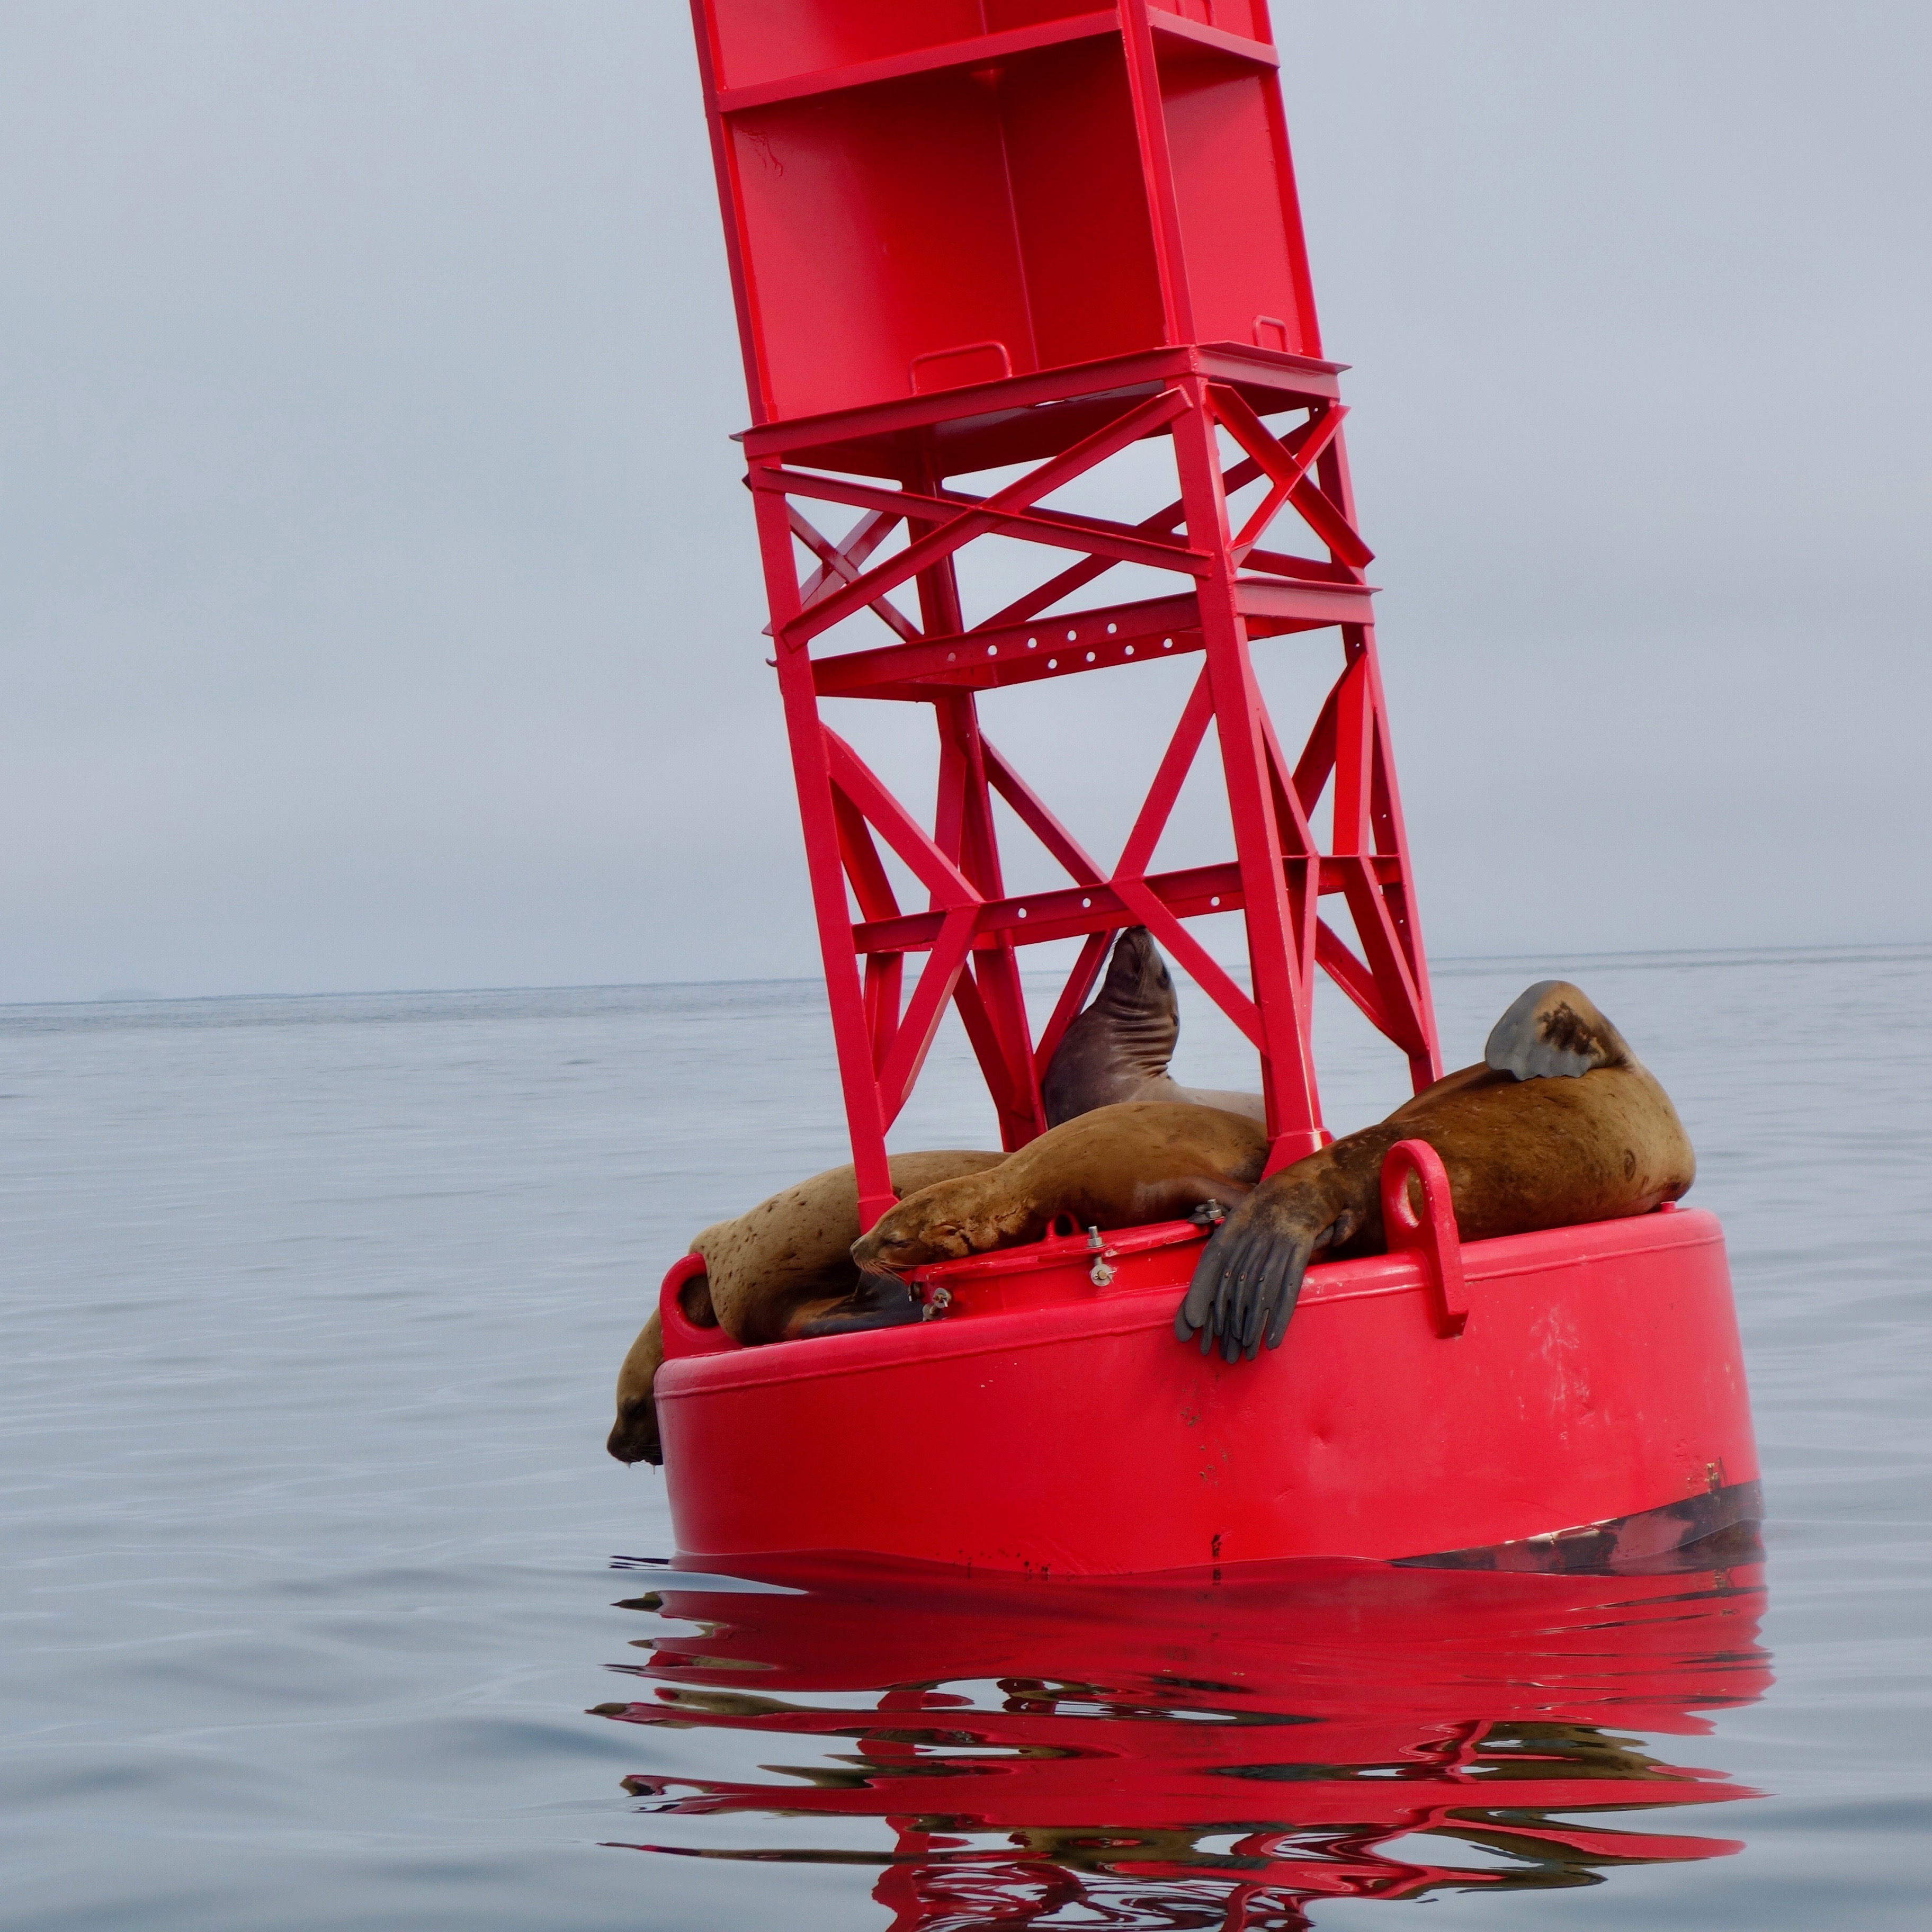 Sealions off the coastline of Sitka, Alaska hang out on a buoy without a care in the world.  